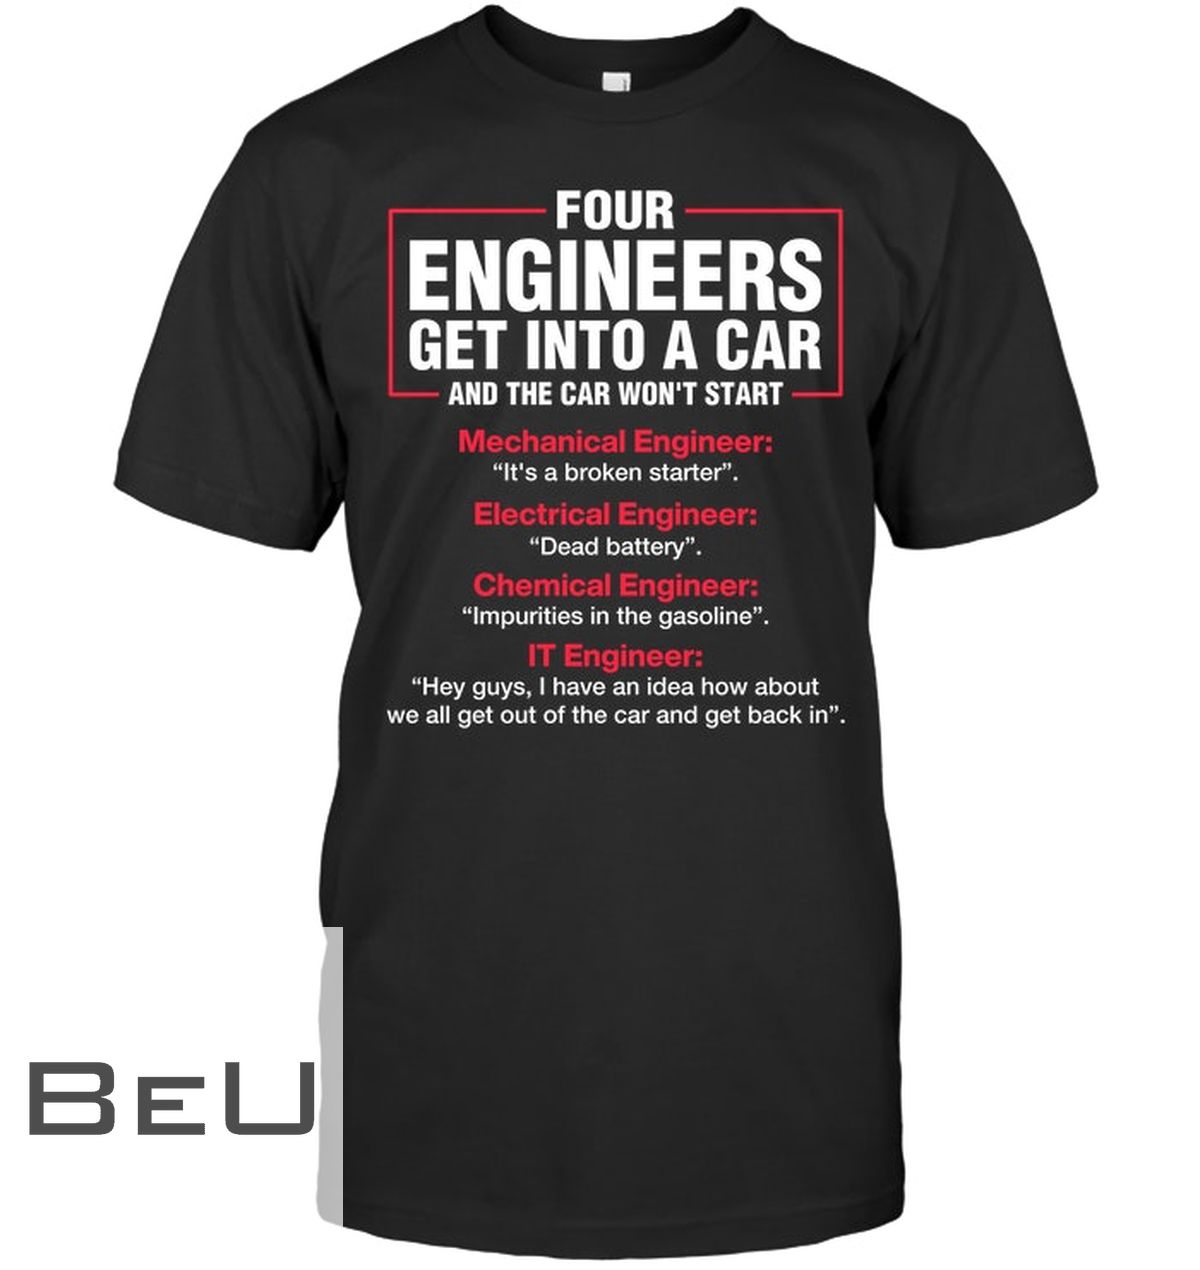 Store Four Engineers Get Into A Car And The Car Won't Start Shirt